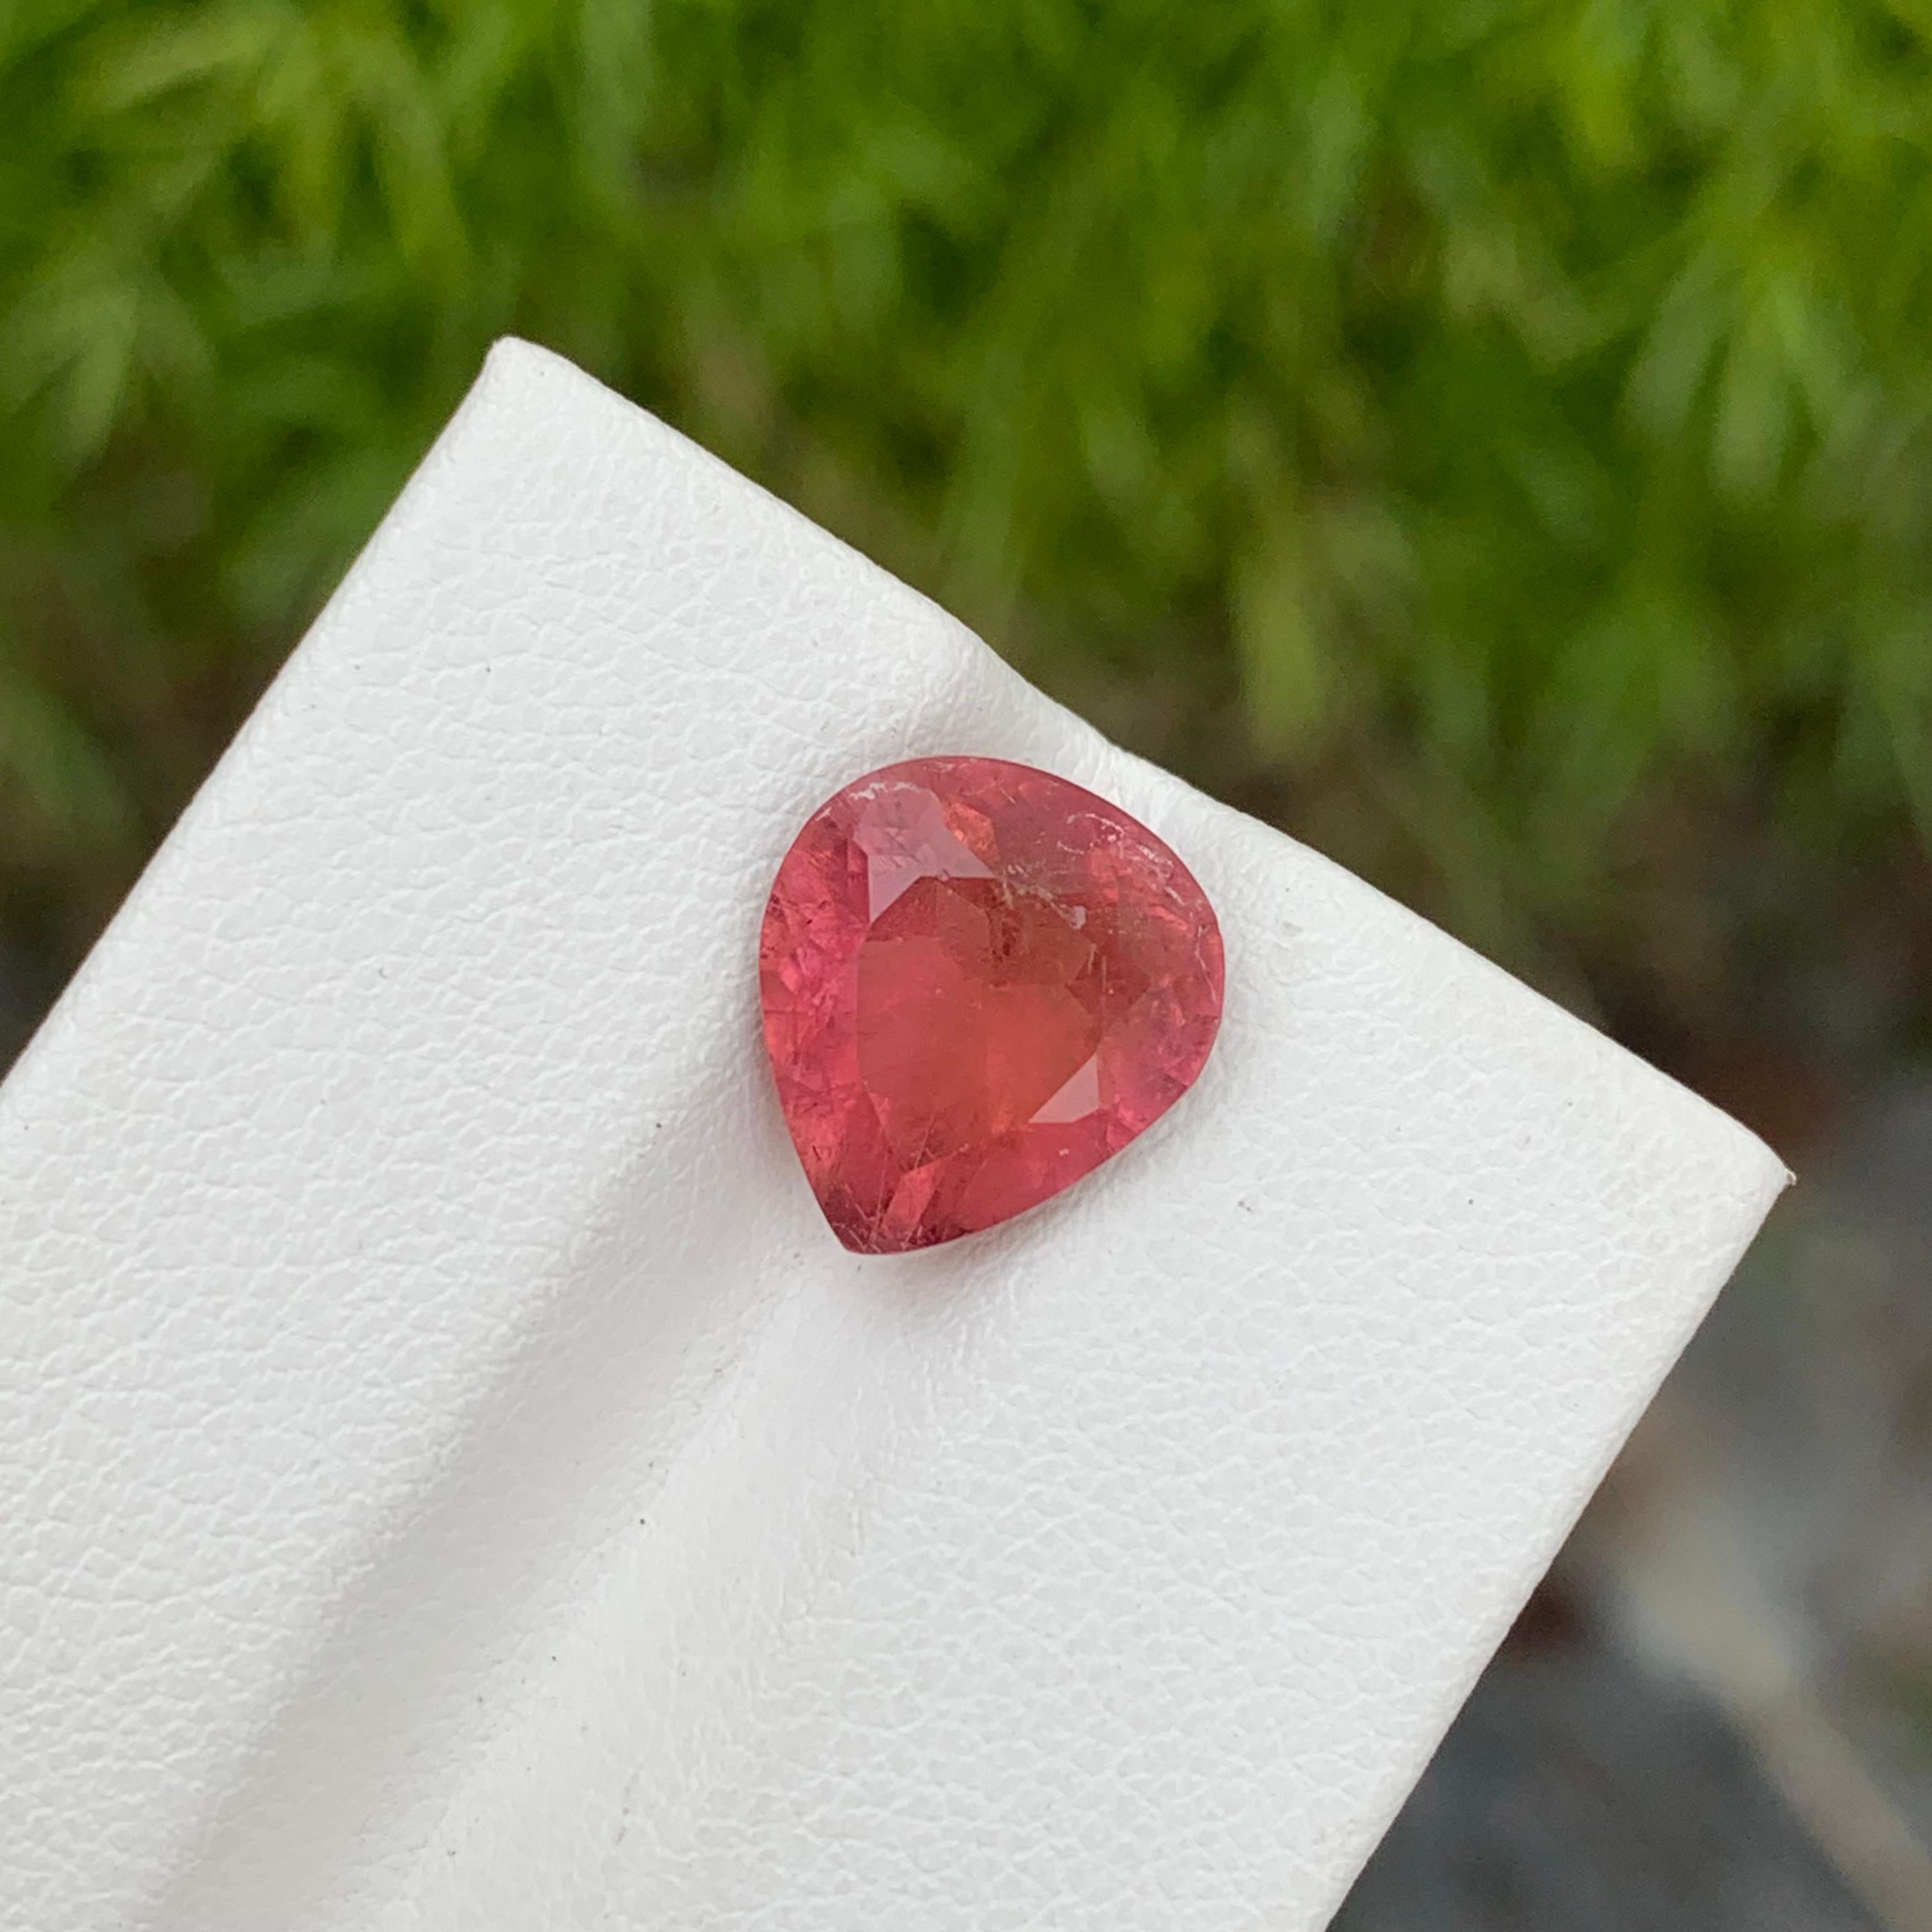 Pear Cut 3.85 Carat Lovely Loose Rubellite Tourmaline Pear Shape Gem From Afghanistan  For Sale